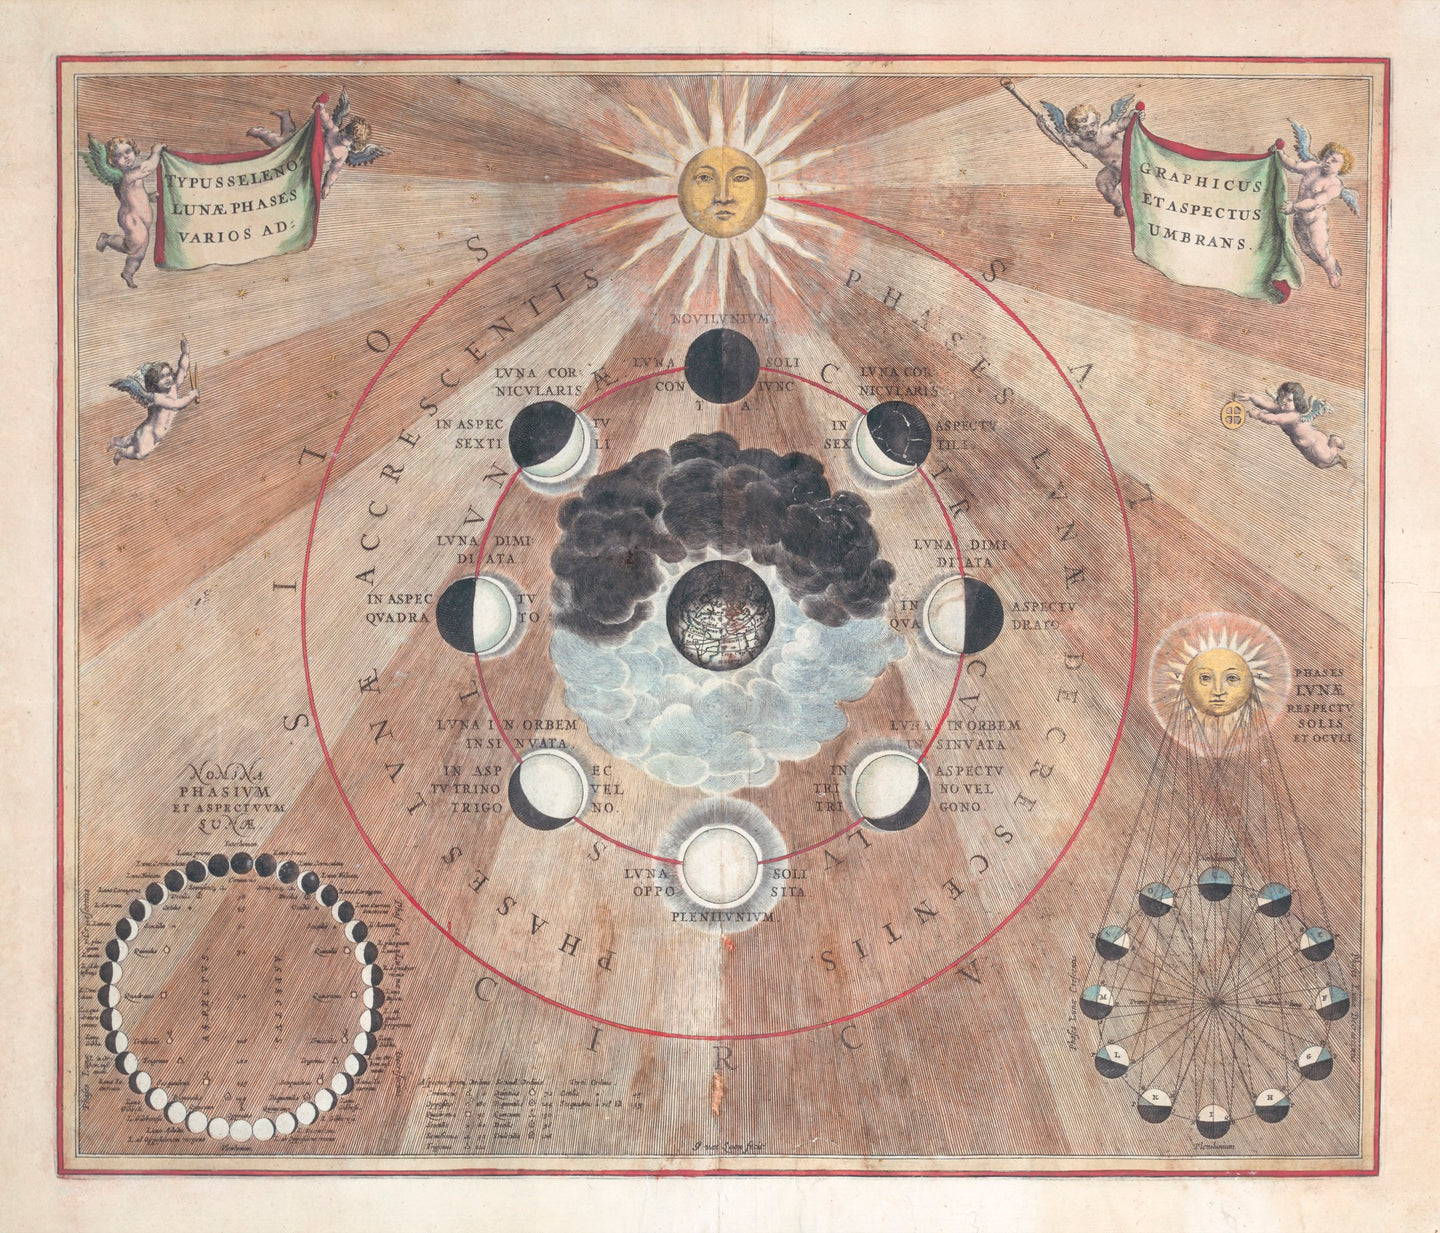 Celestical chart showing phases of sun and moon centred on earth.